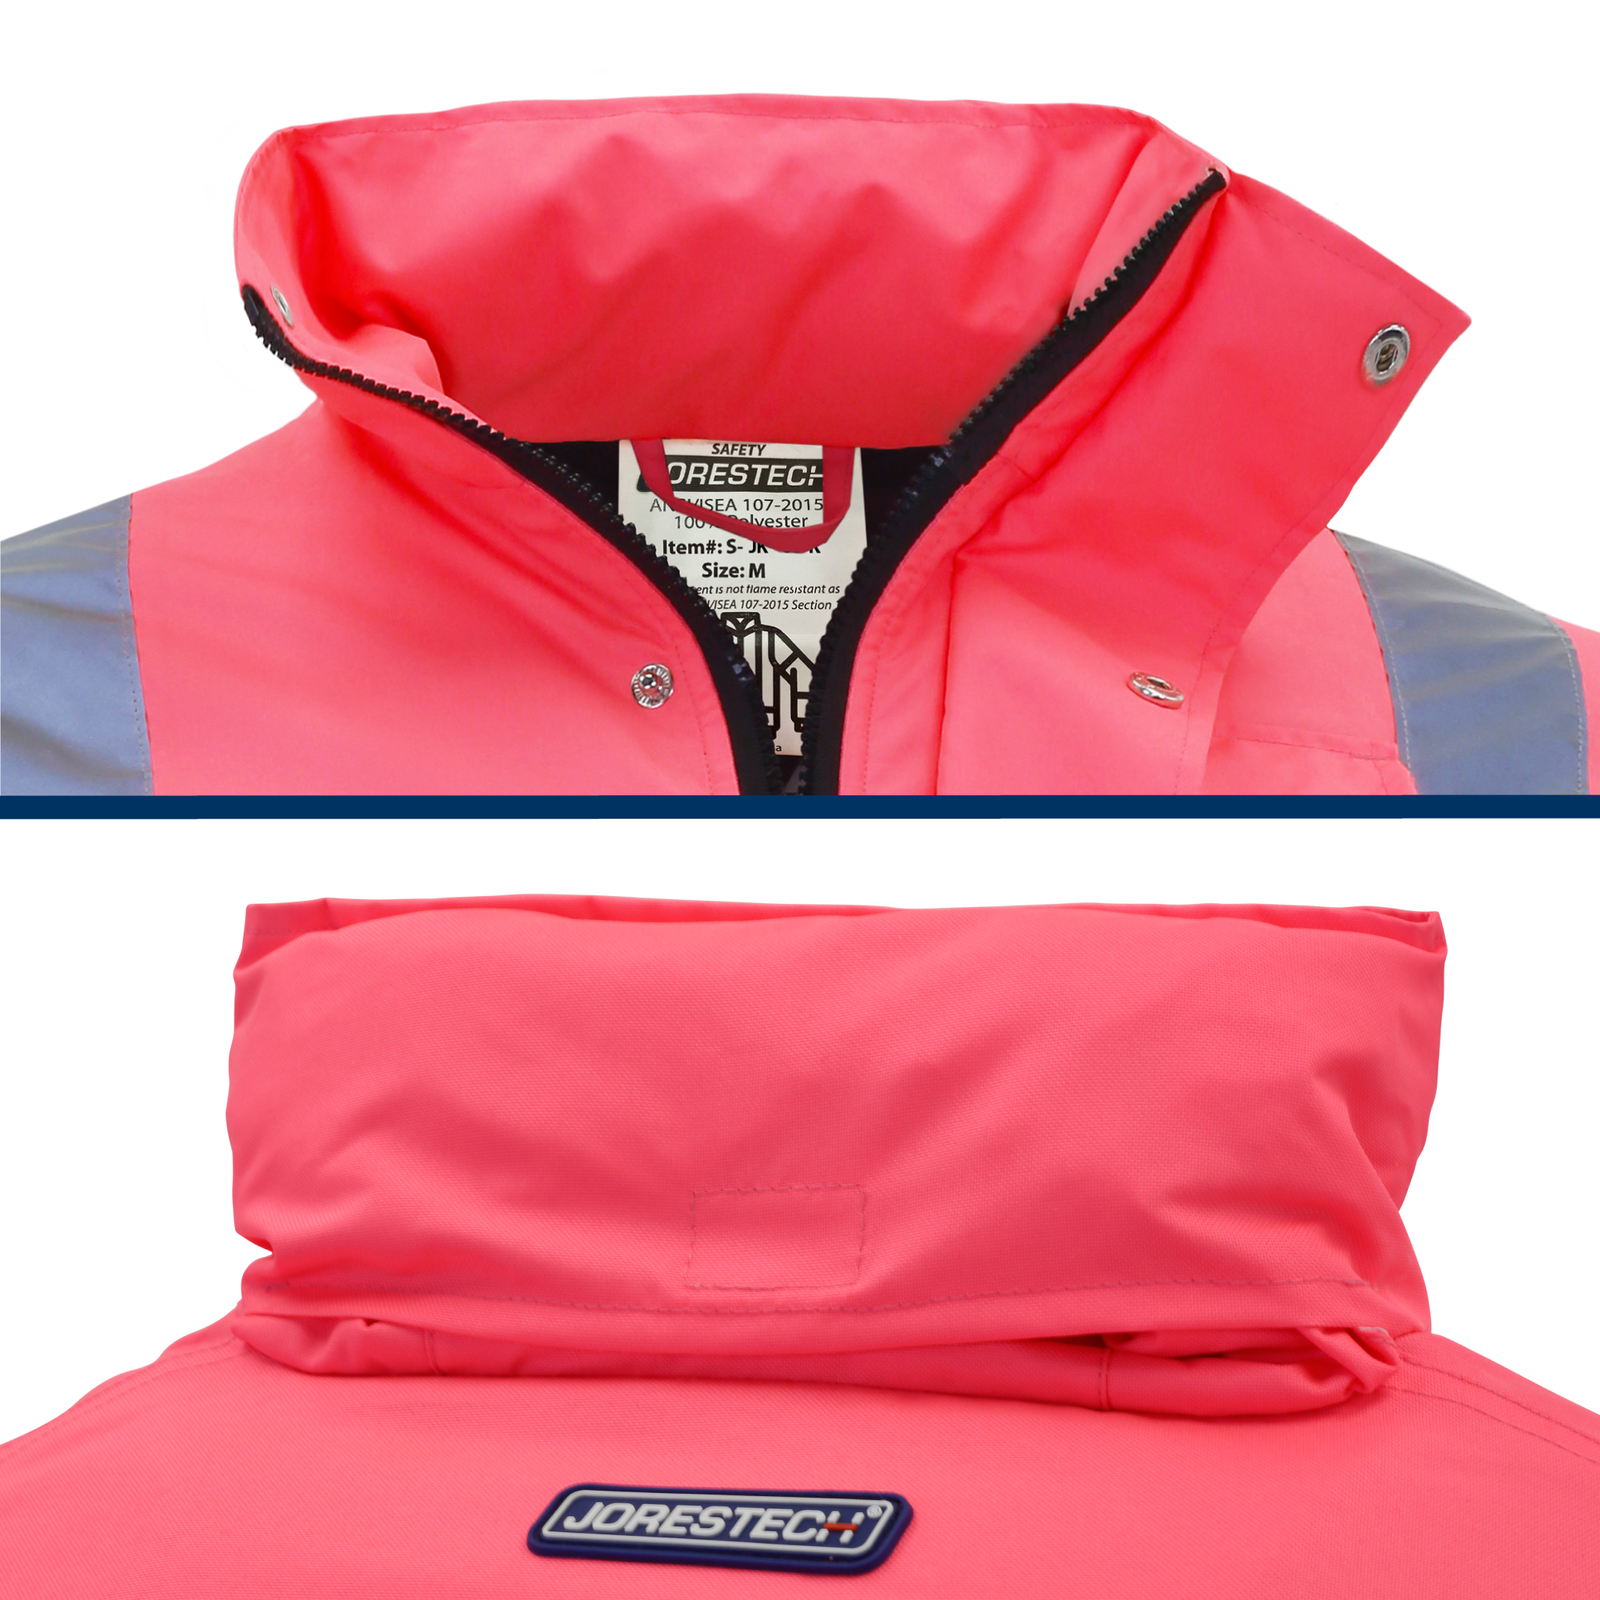 Shows a closeup of the zipper and he flap to cover the zipper of the Jorestech pink weather proof safety jacket. Also shows the pocket were the hoodie is tucked inside